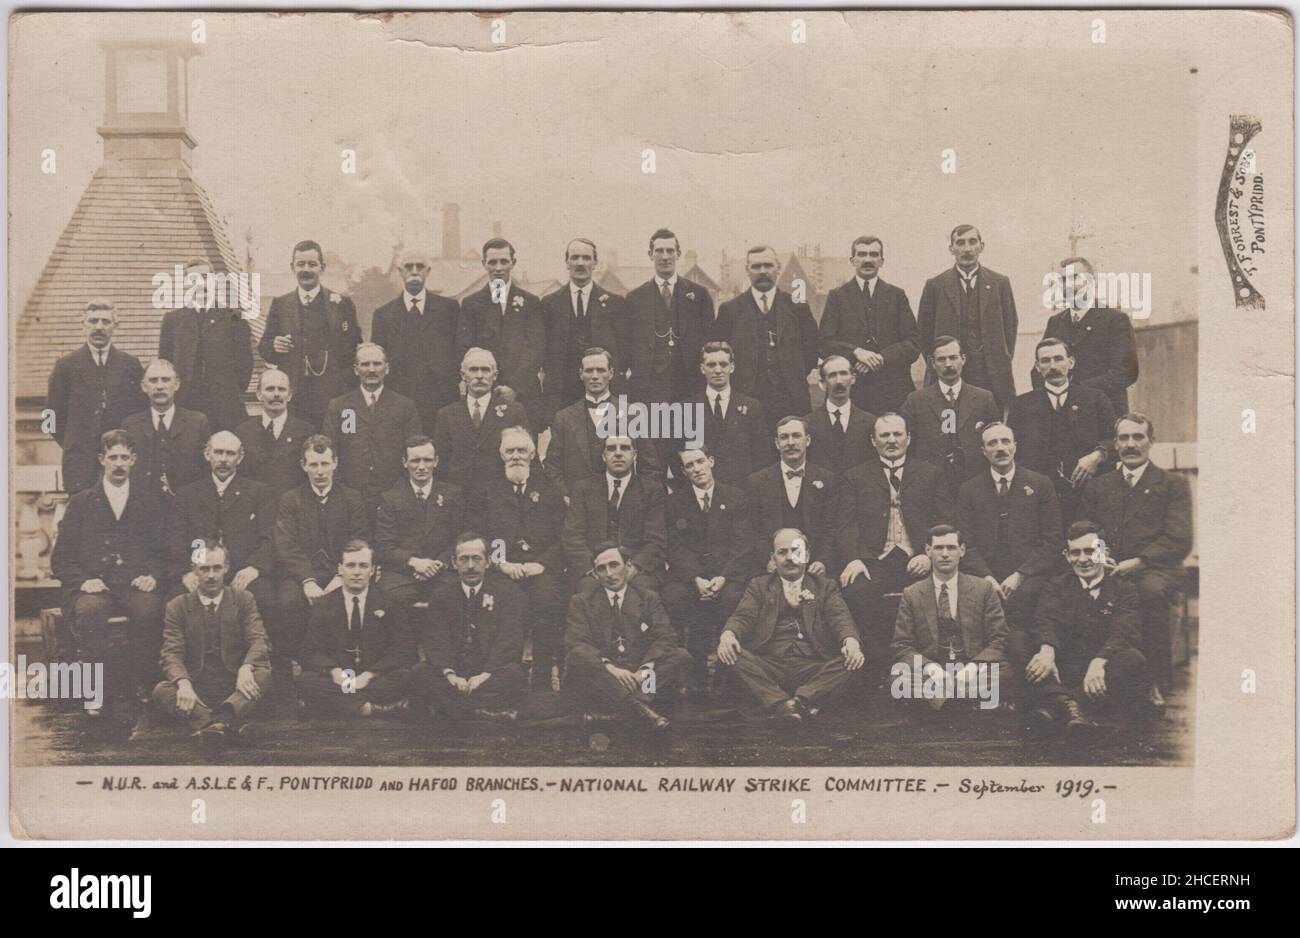 National Union of Railwaymen (NUR) & Associated Society of Locomotive Engineers and Firemen (ASLEF) Pontypridd & Hafod branches, National Railway Strike Committee, September 1919. Group of men photographed outside during the 1919 railway strike Stock Photo